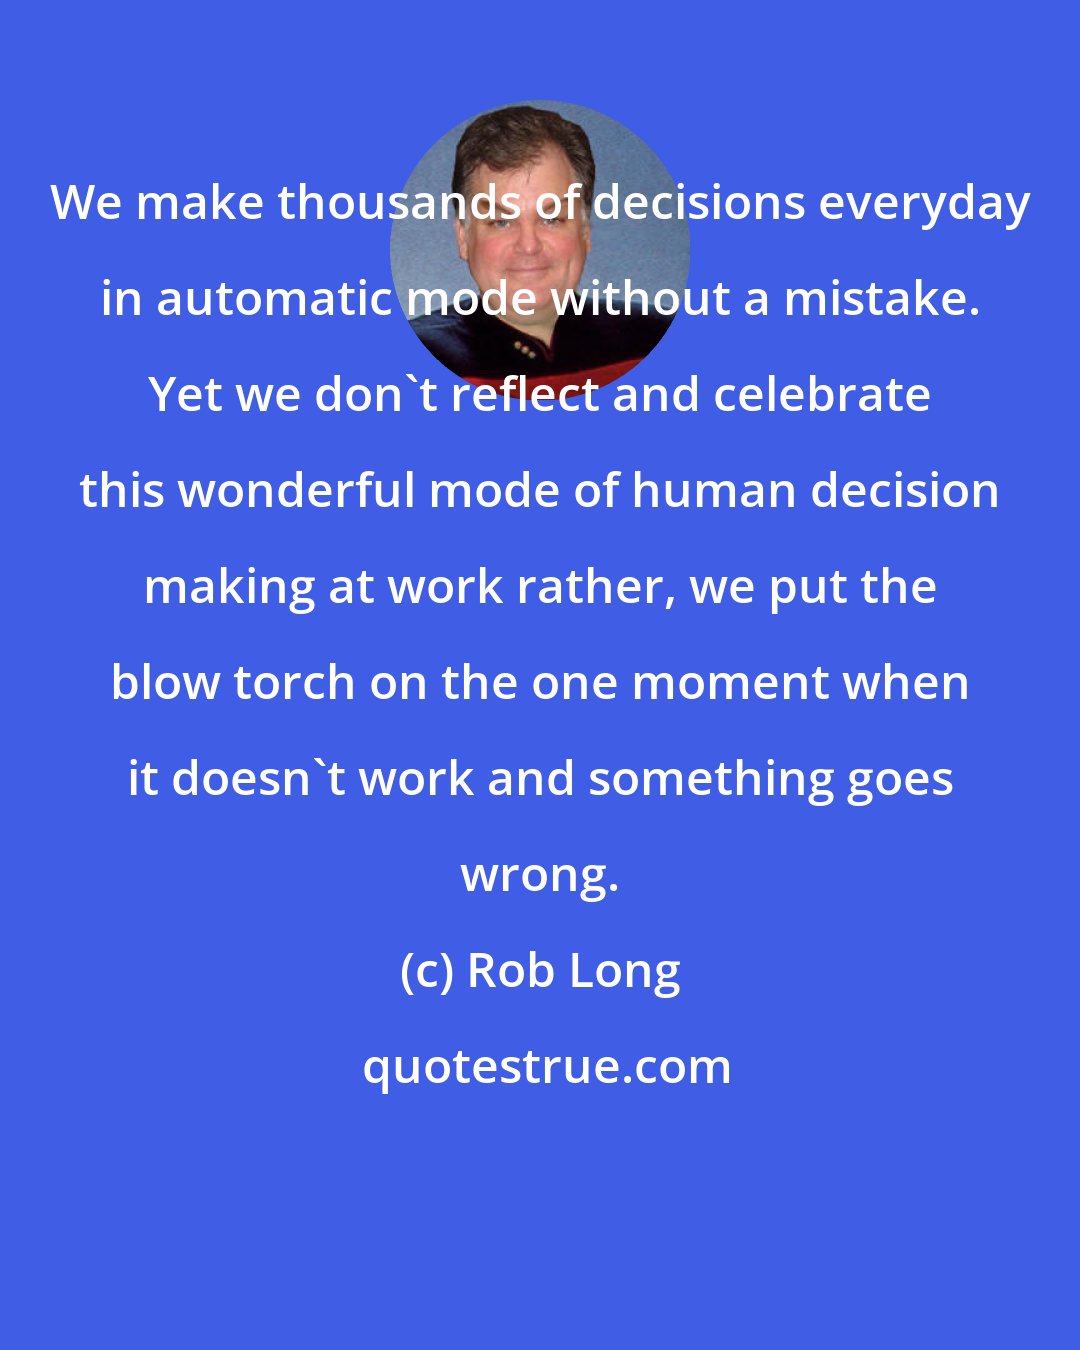 Rob Long: We make thousands of decisions everyday in automatic mode without a mistake. Yet we don't reflect and celebrate this wonderful mode of human decision making at work rather, we put the blow torch on the one moment when it doesn't work and something goes wrong.